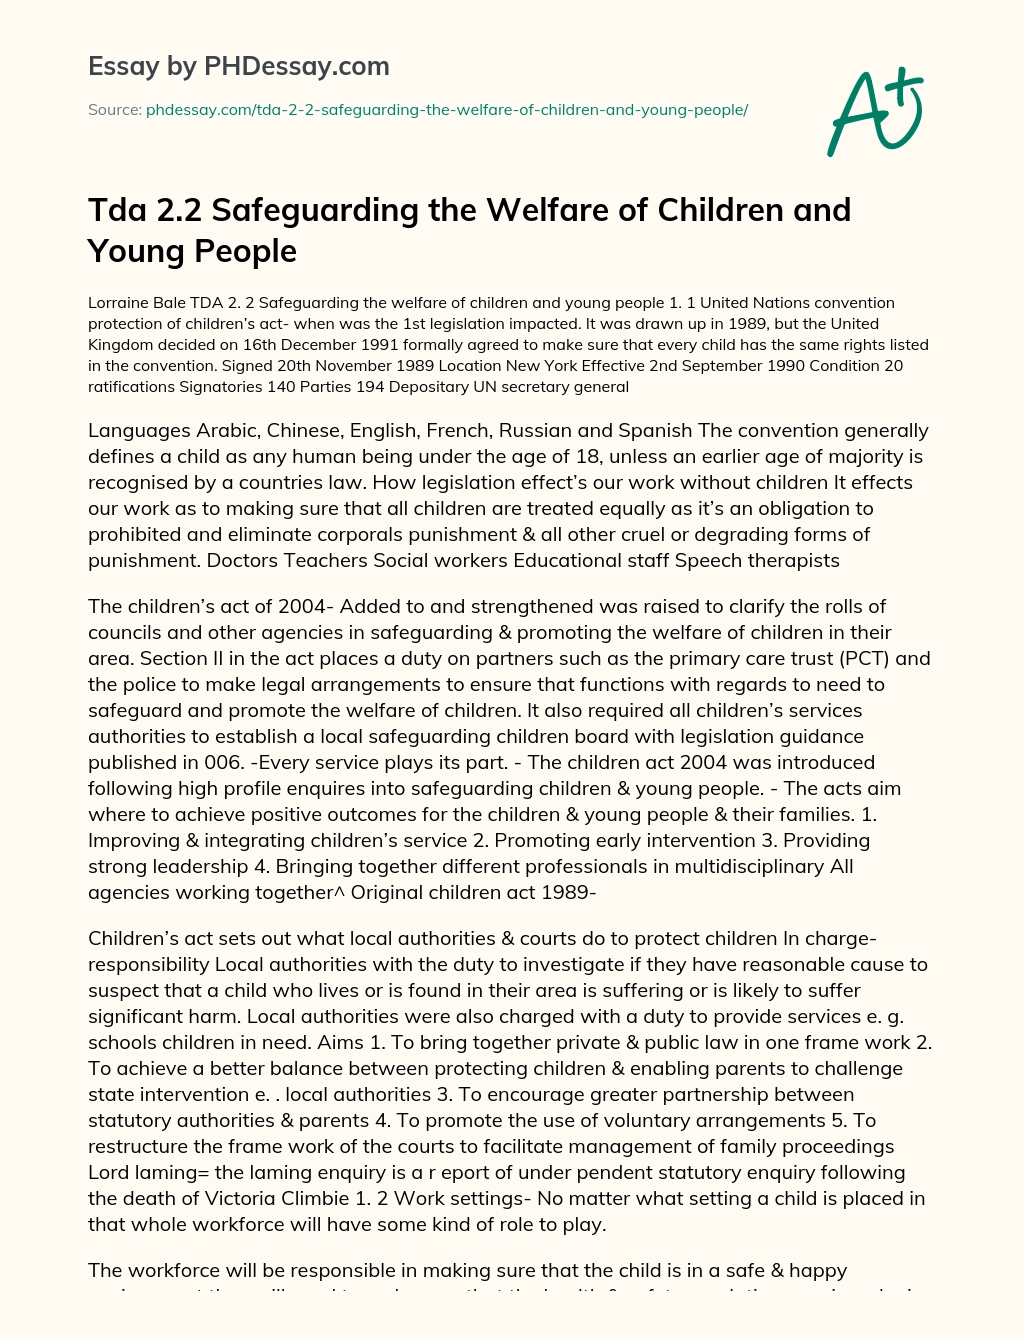 Tda 2.2 Safeguarding the Welfare of Children and Young People essay